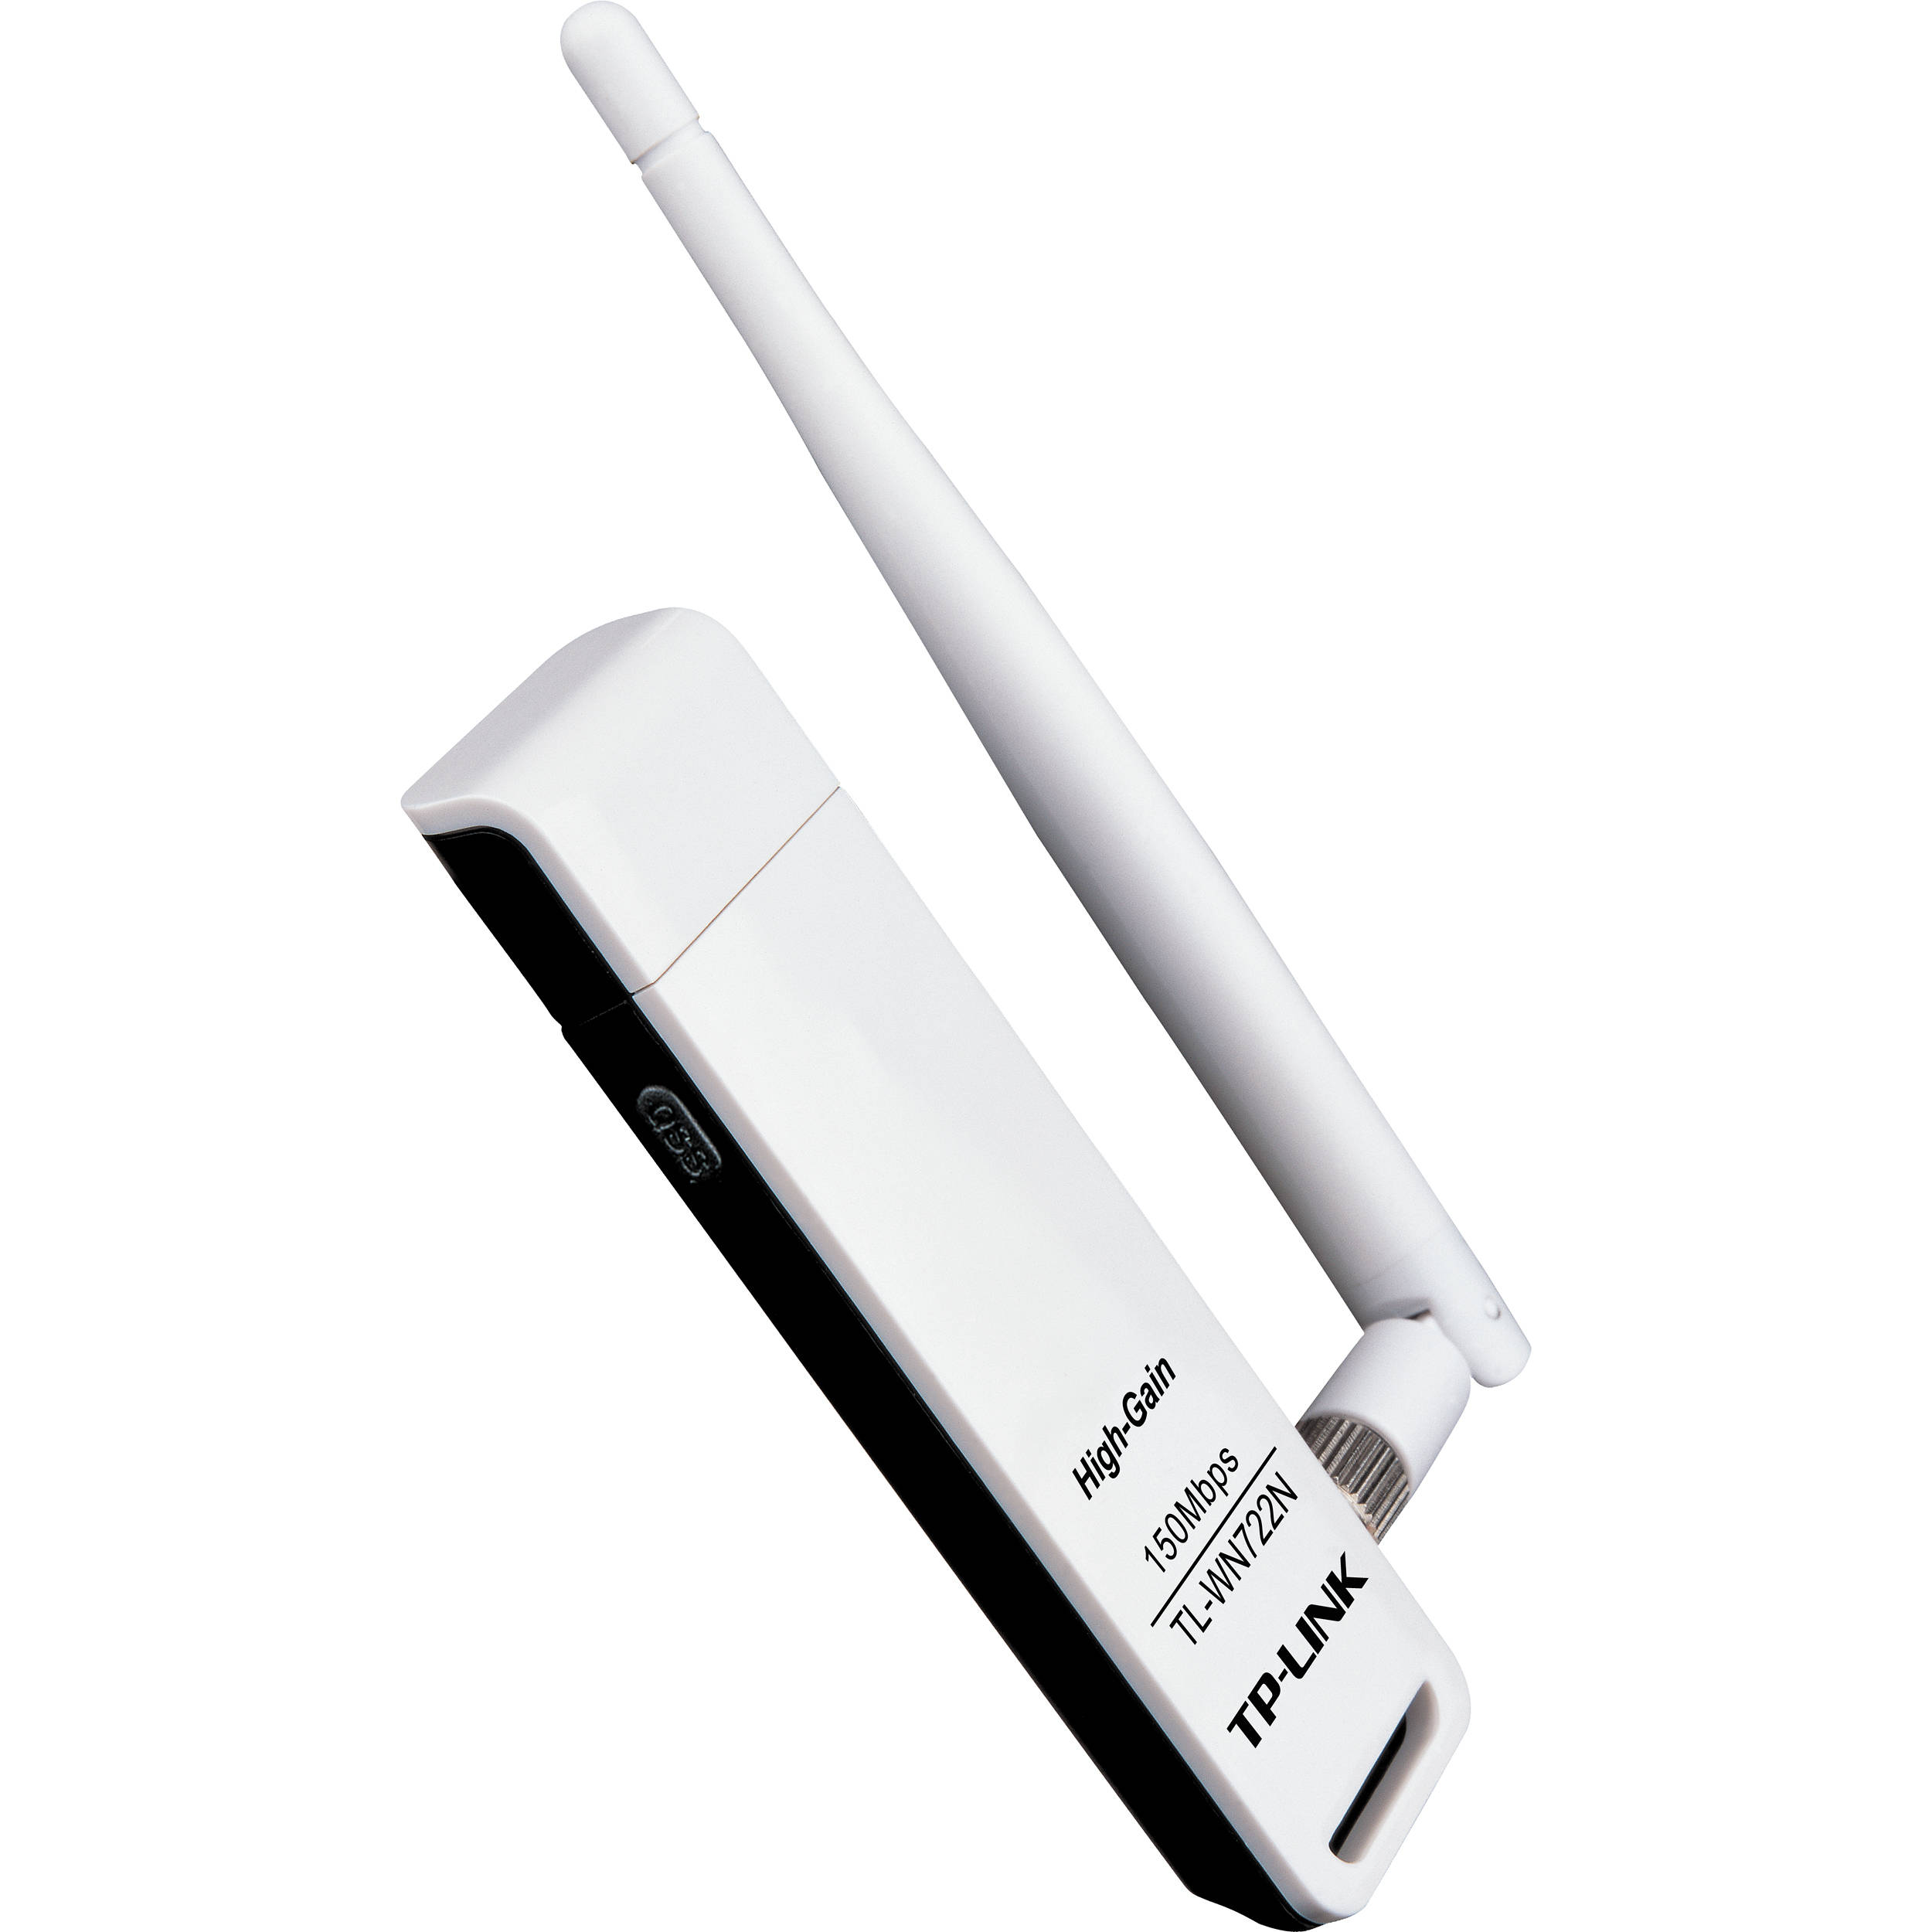 Tp link usb wifi driver free download